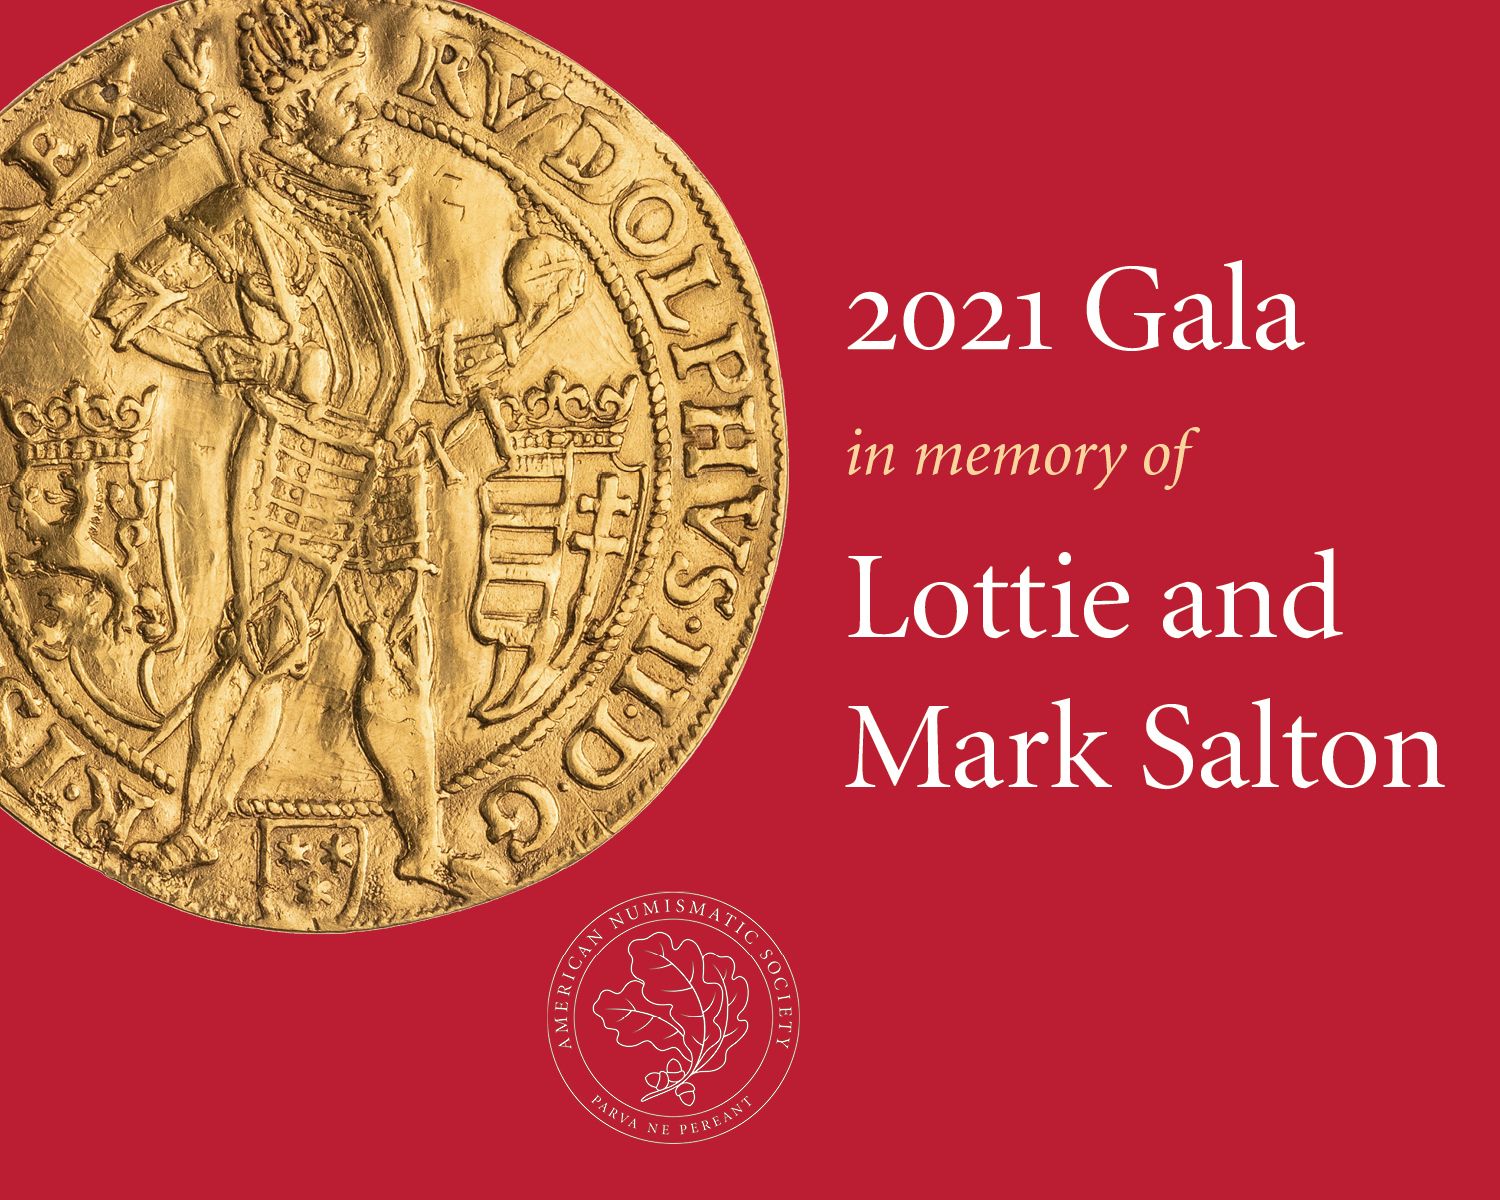 Press Release: The	American Numismatic Society Announces 2021 Gala